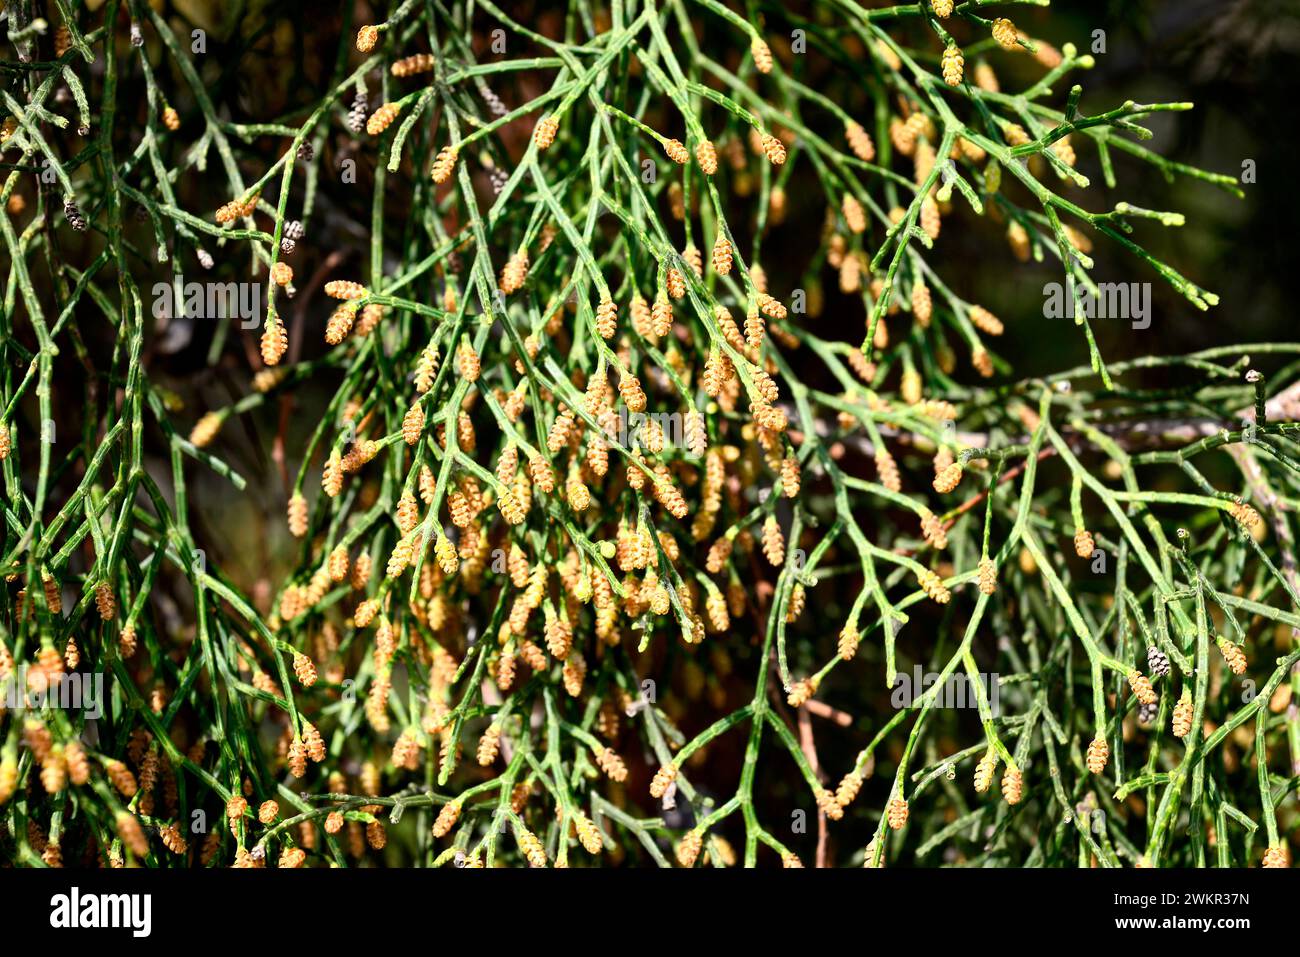 Araar, sandarac or Barbary thuja (Tetraclinis articulata) is a coniferous evergreen tree endemic to western Mediterranean region, specially northern A Stock Photo